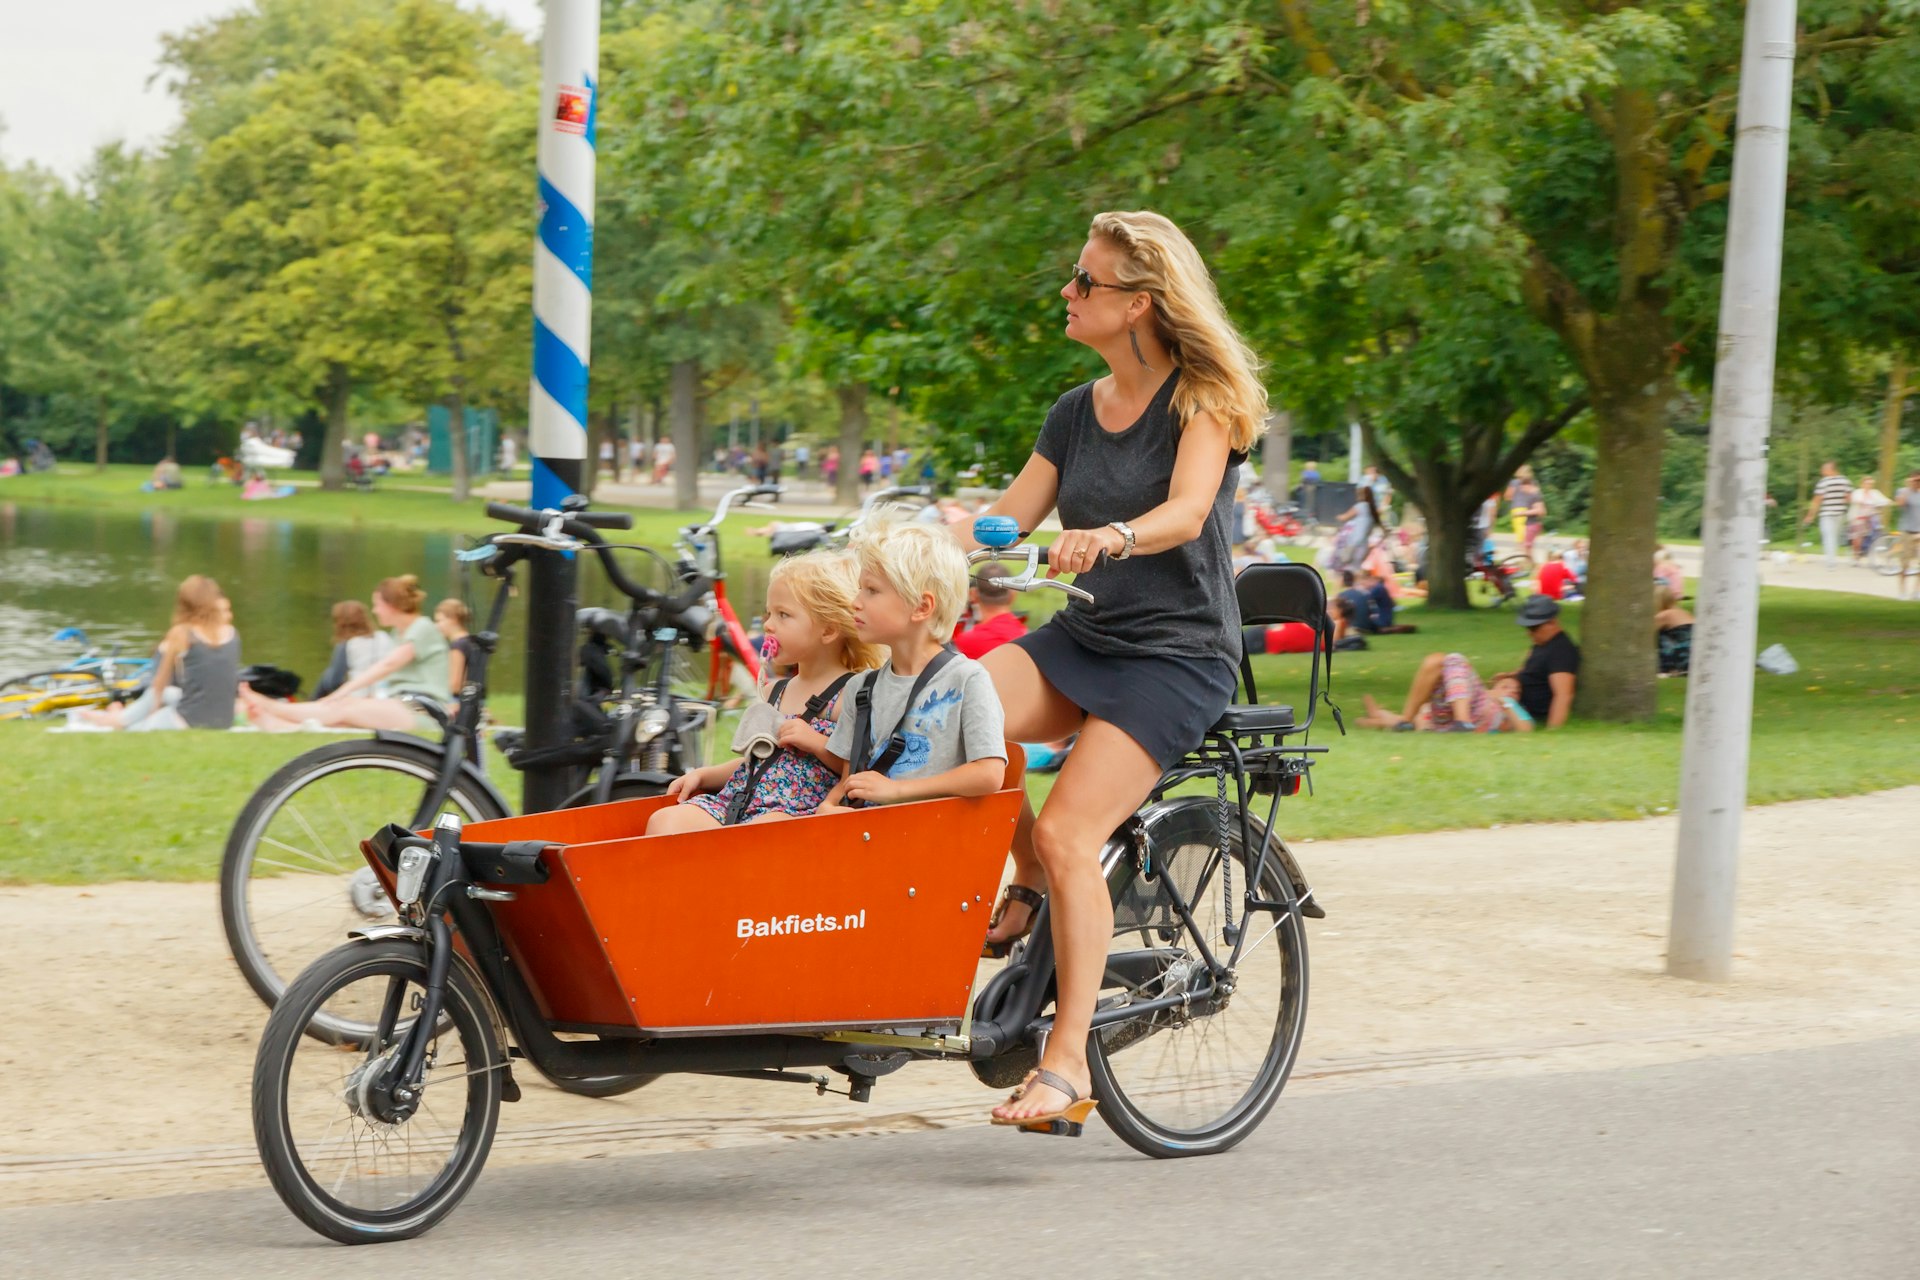 A woman rides a cargo bike with children in Amsterdam